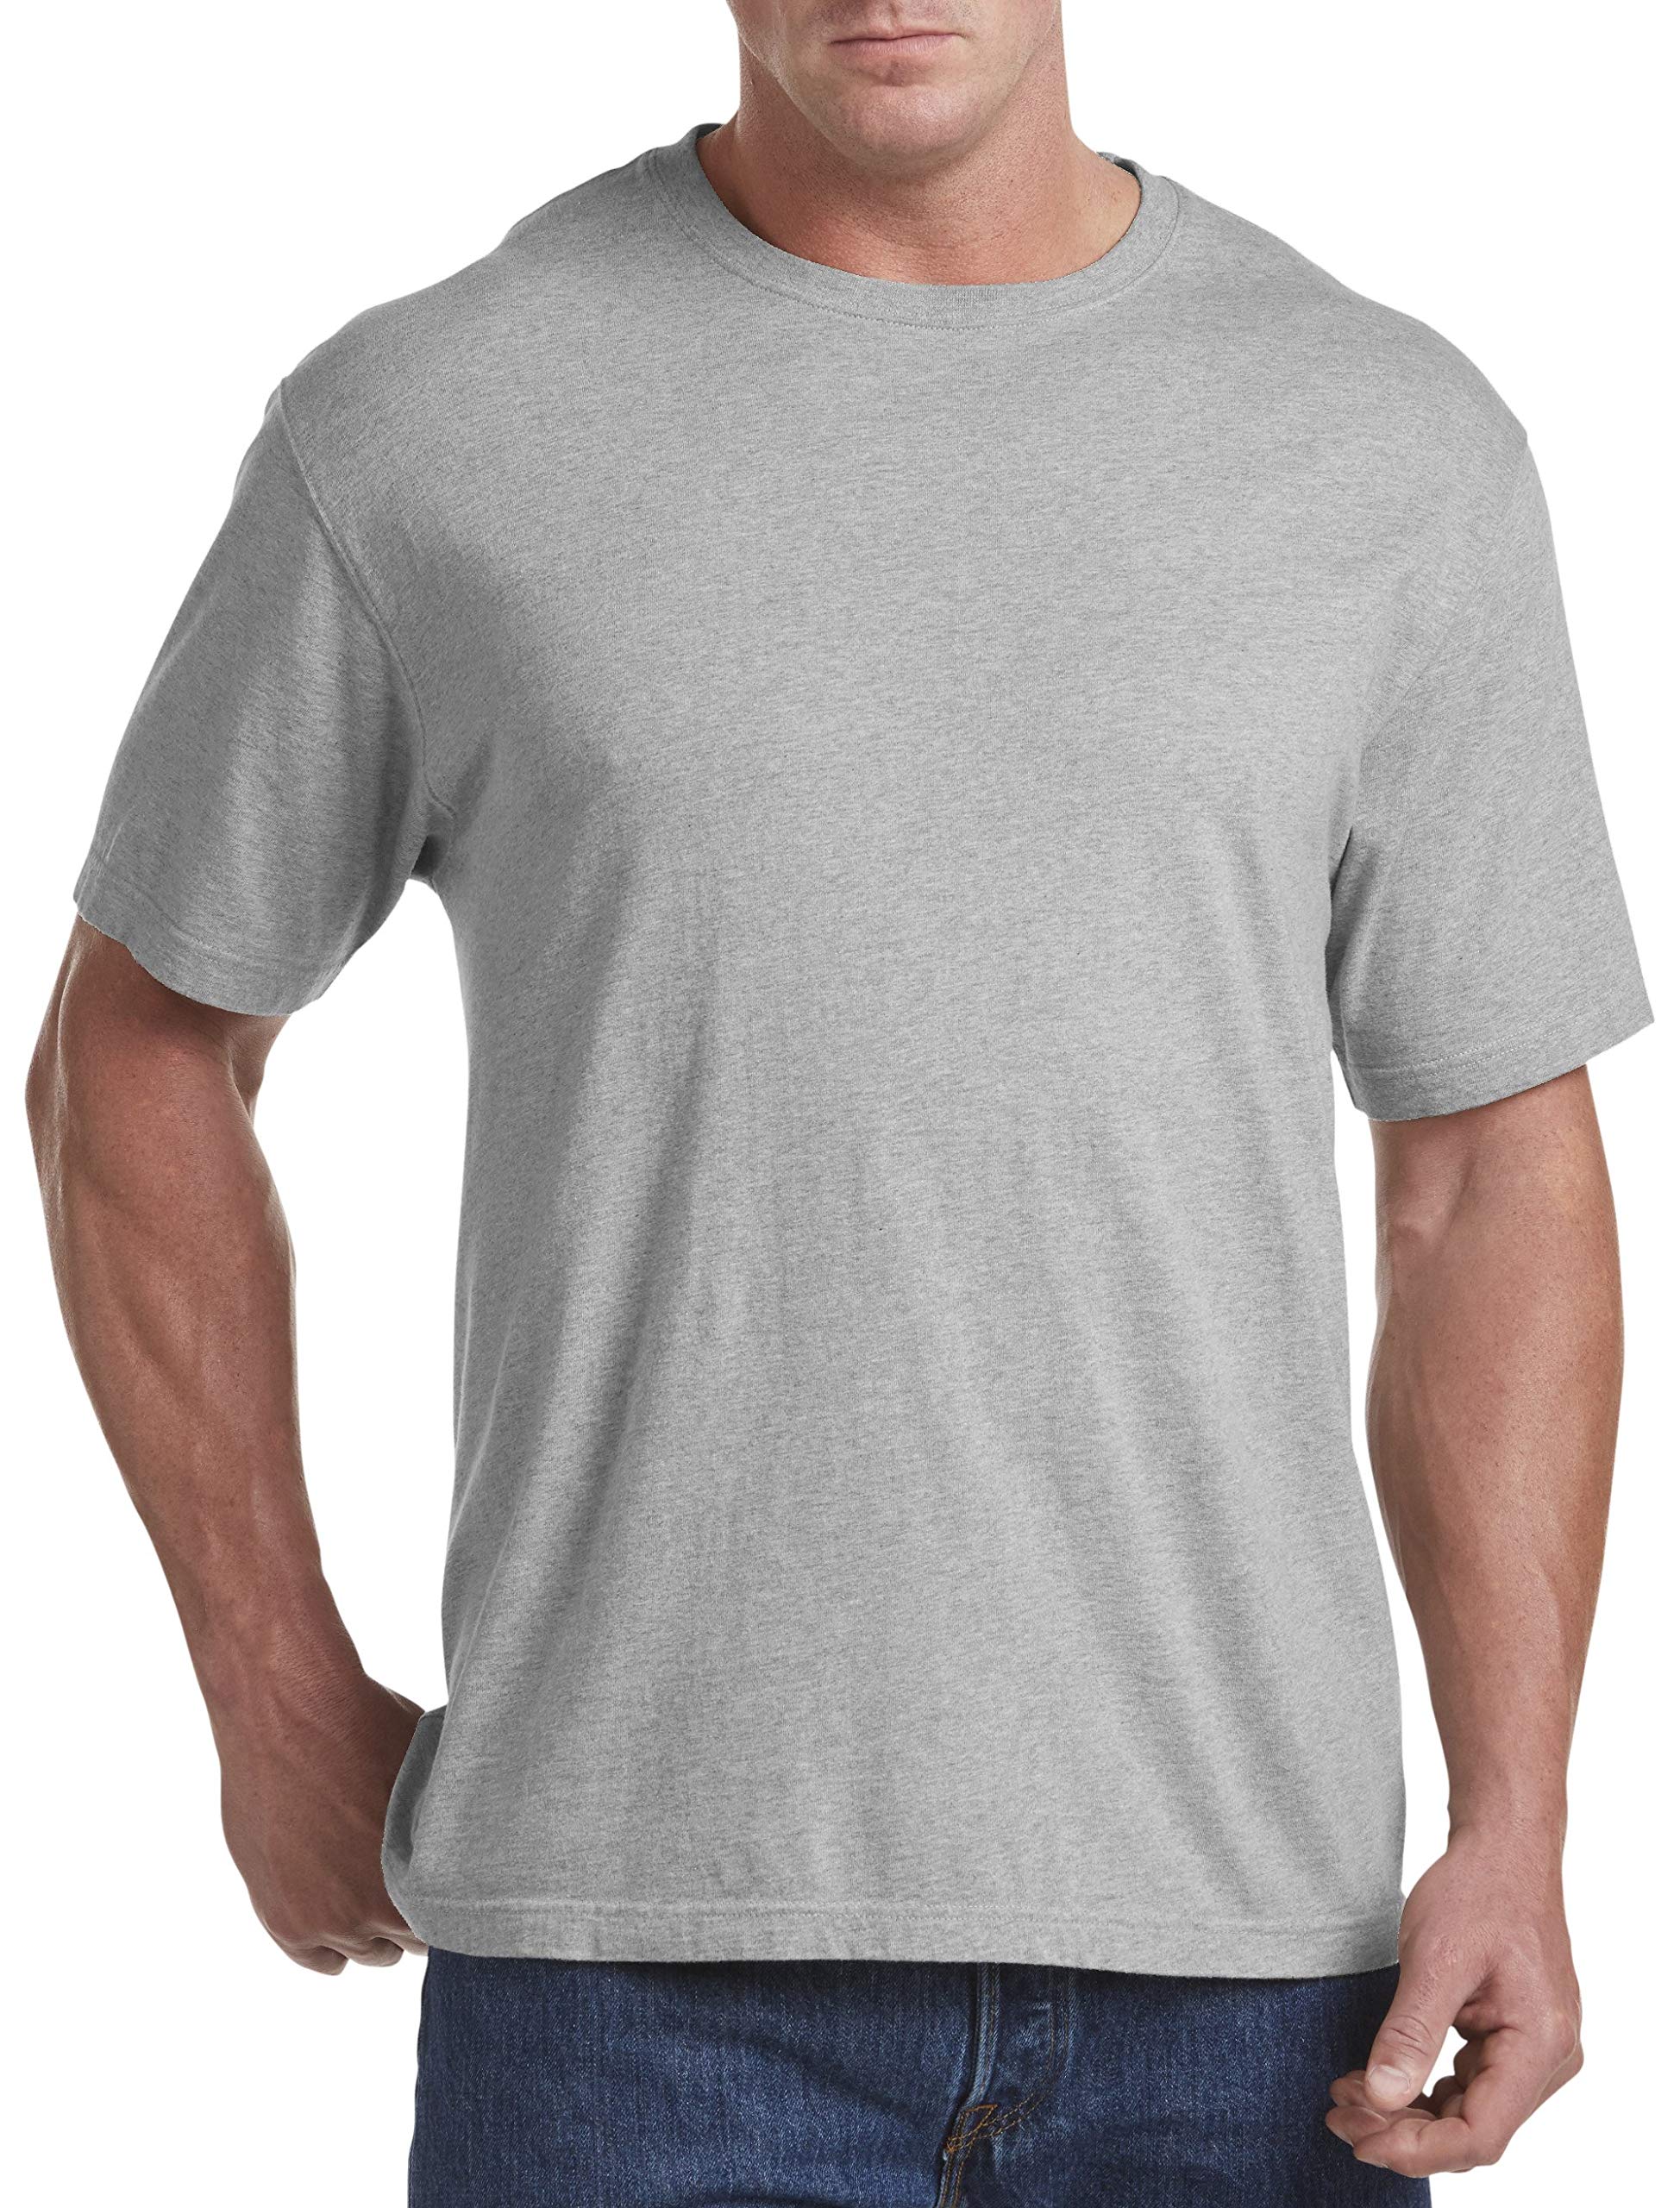 Harbor Bay by DXL Big and Tall Wicking No Pocket T-Shirt (5XTALL, Grey Heather)